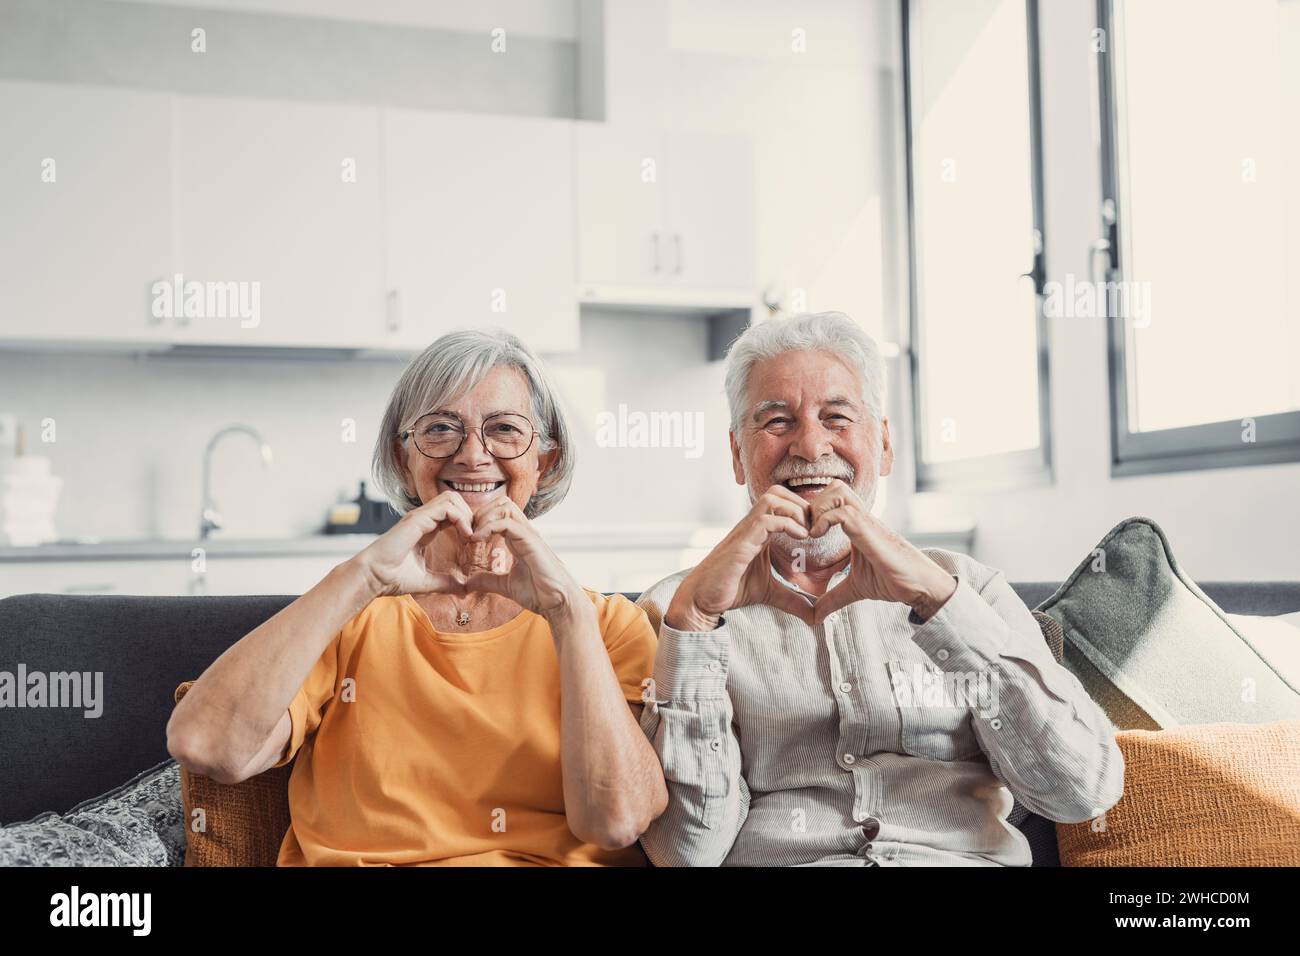 Close up portrait happy sincere middle aged elderly retired family couple making heart gesture with fingers, showing love or demonstrating sincere feelings together indoors, looking at camera. Stock Photo